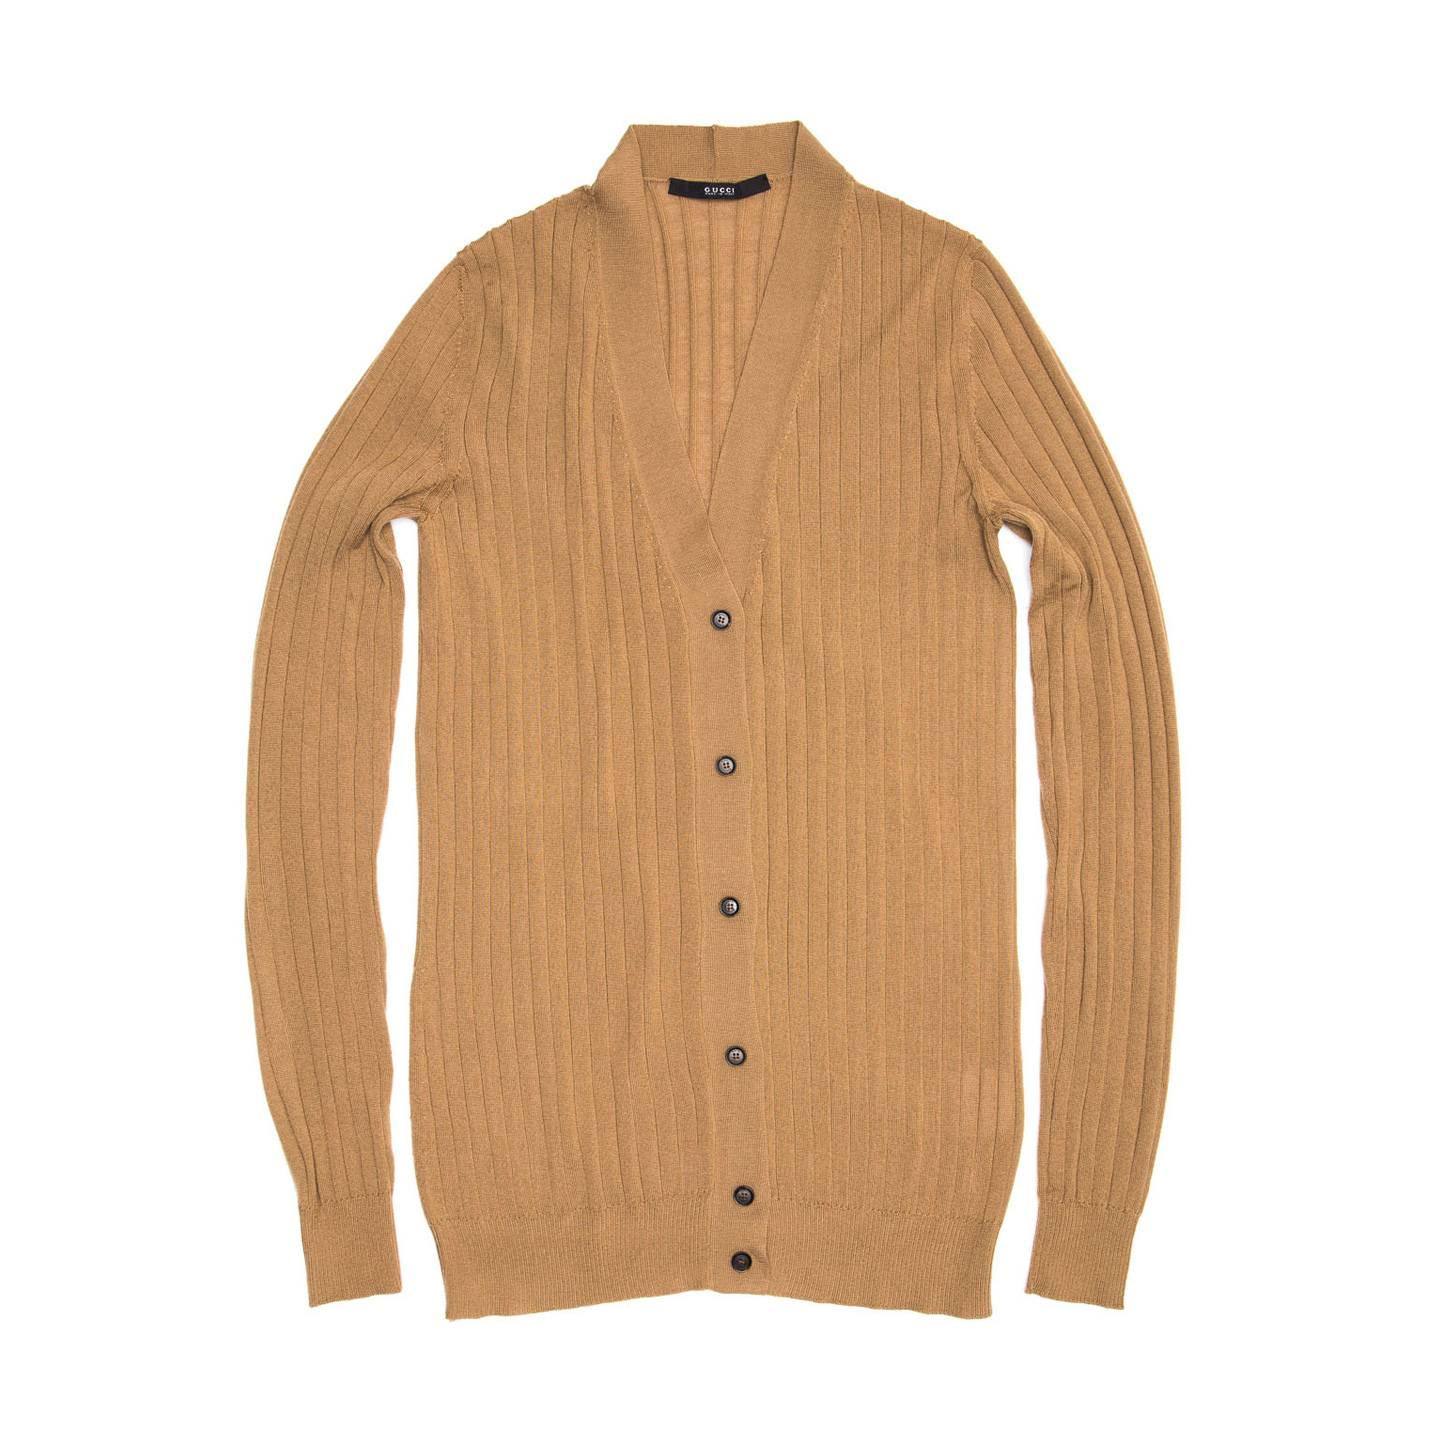 Camel fine cashmere ribbed knit cardigan with long sleeve and V-neck.

Size  42 Italian sizing

Condition  Excellent: never worn